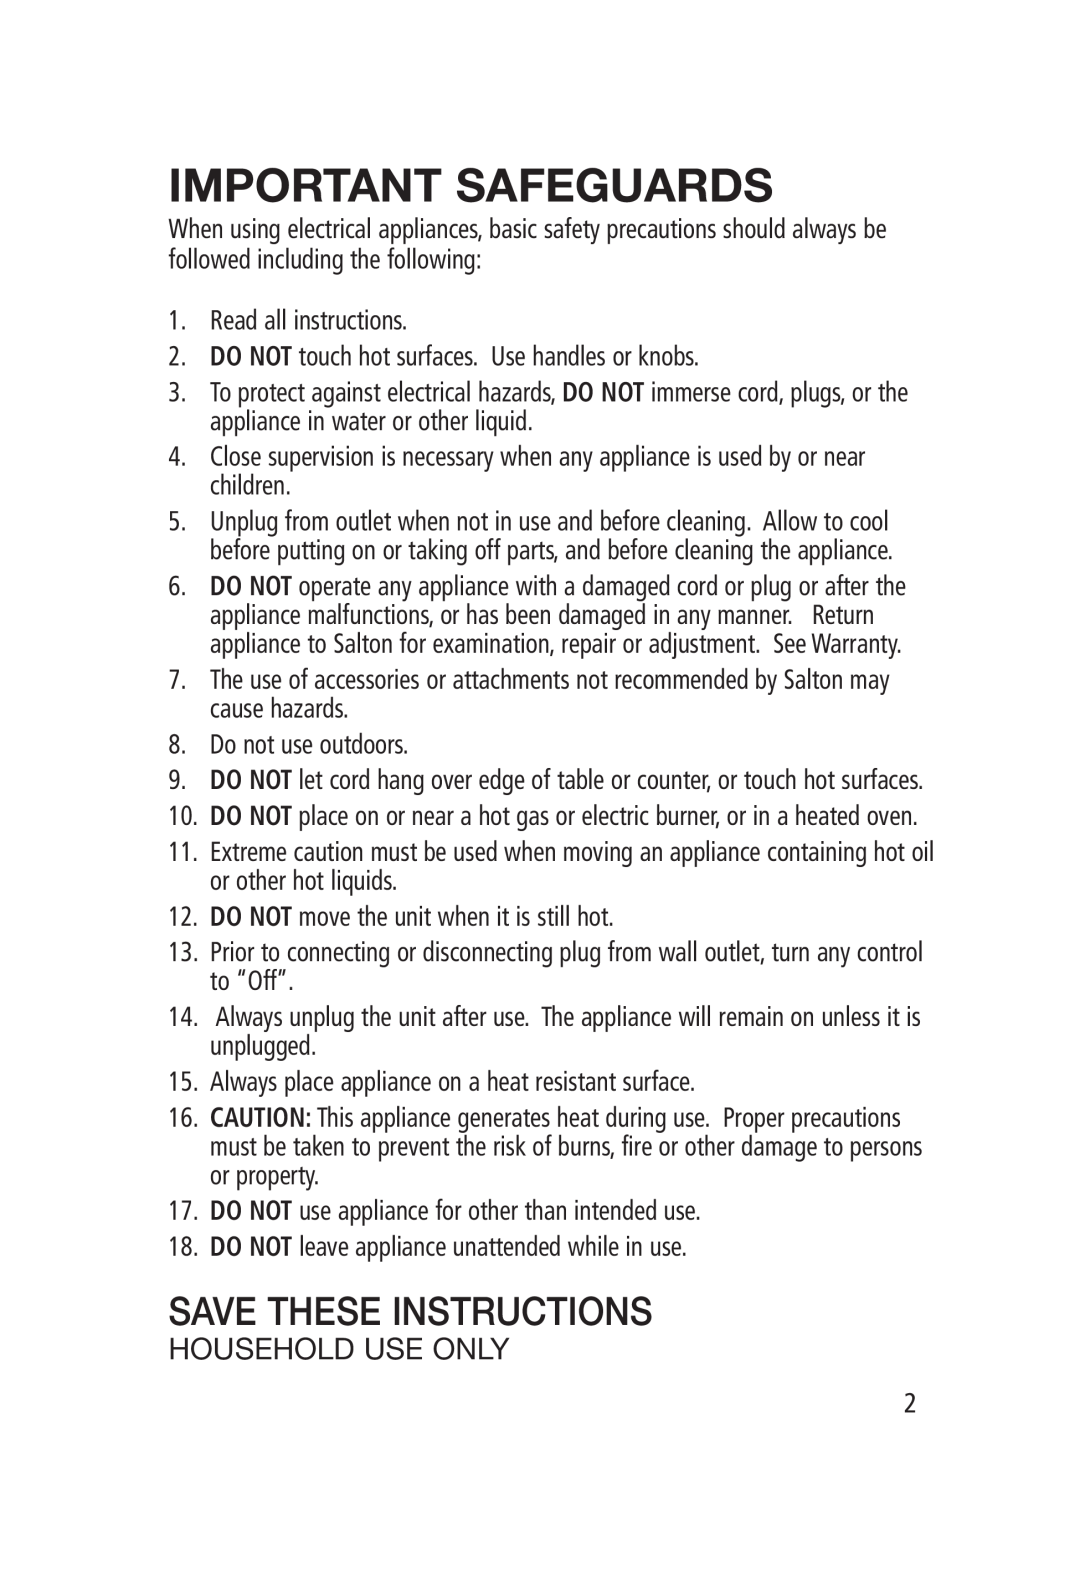 Salton WM-1186 manual Important Safeguards, Save These Instructions, Household Use Only 